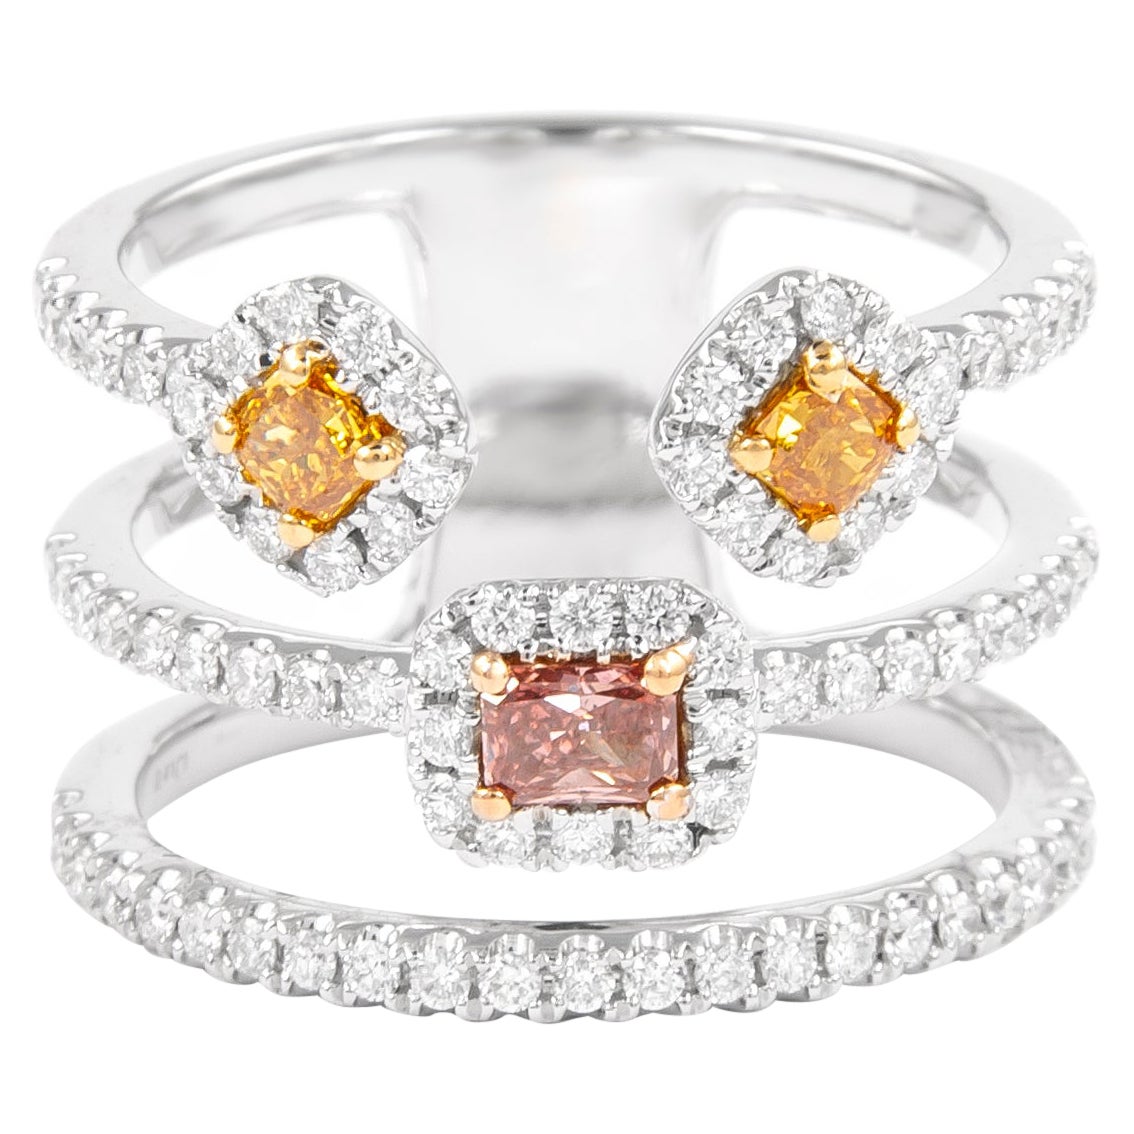 Alexander GIA Certified 1ctt Fancy Deep Brown-Pink Diamond Cocktail Ring 18k For Sale